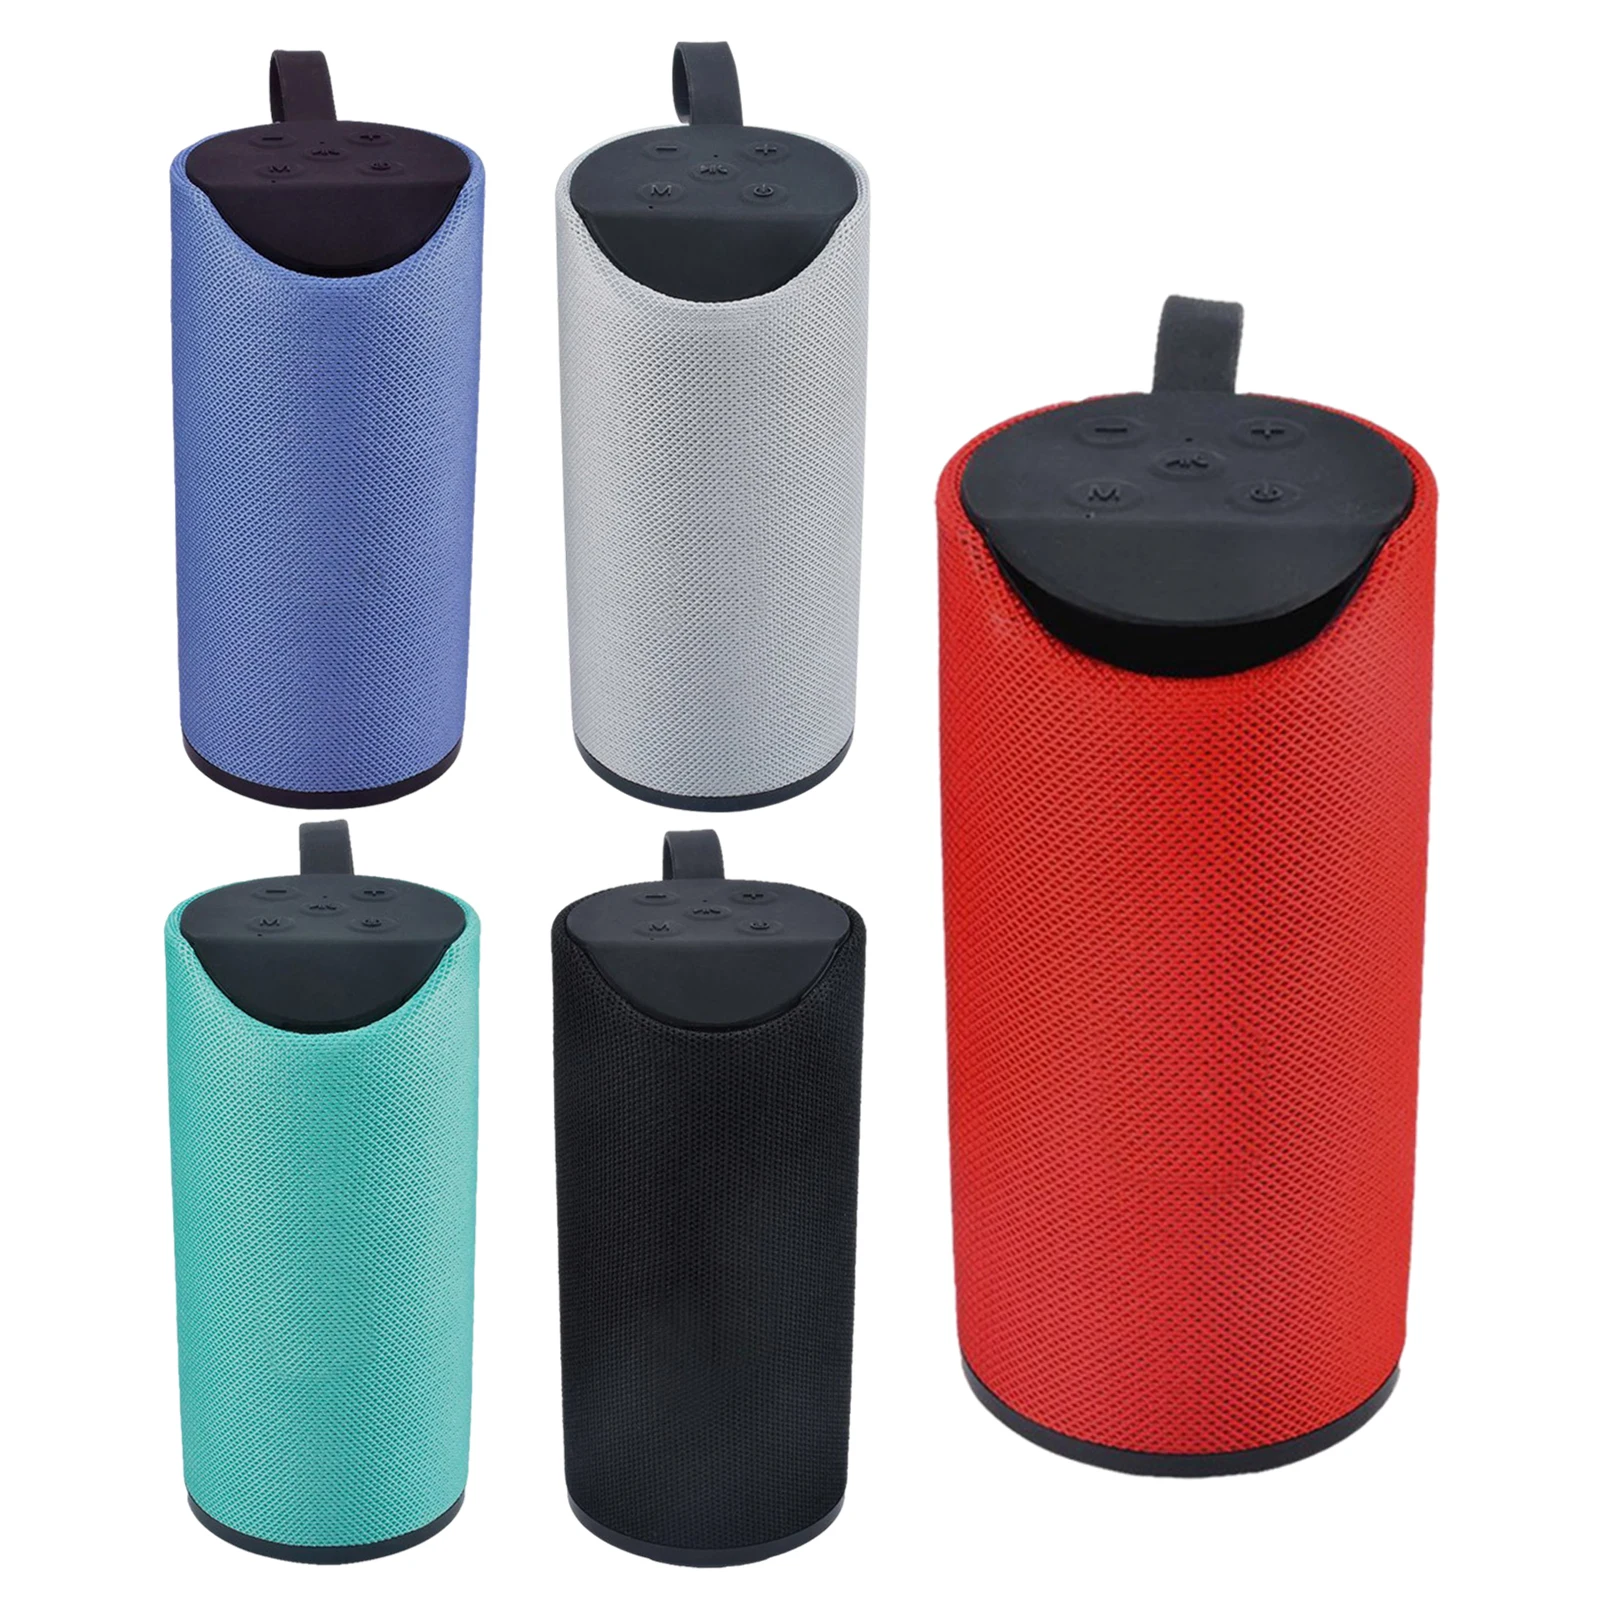 Portable Bluetooth Speaker Wireless 5.0 800mAh Strong Sound Built-in Mic Outdoor Cycling Bicycle Travel Accessories